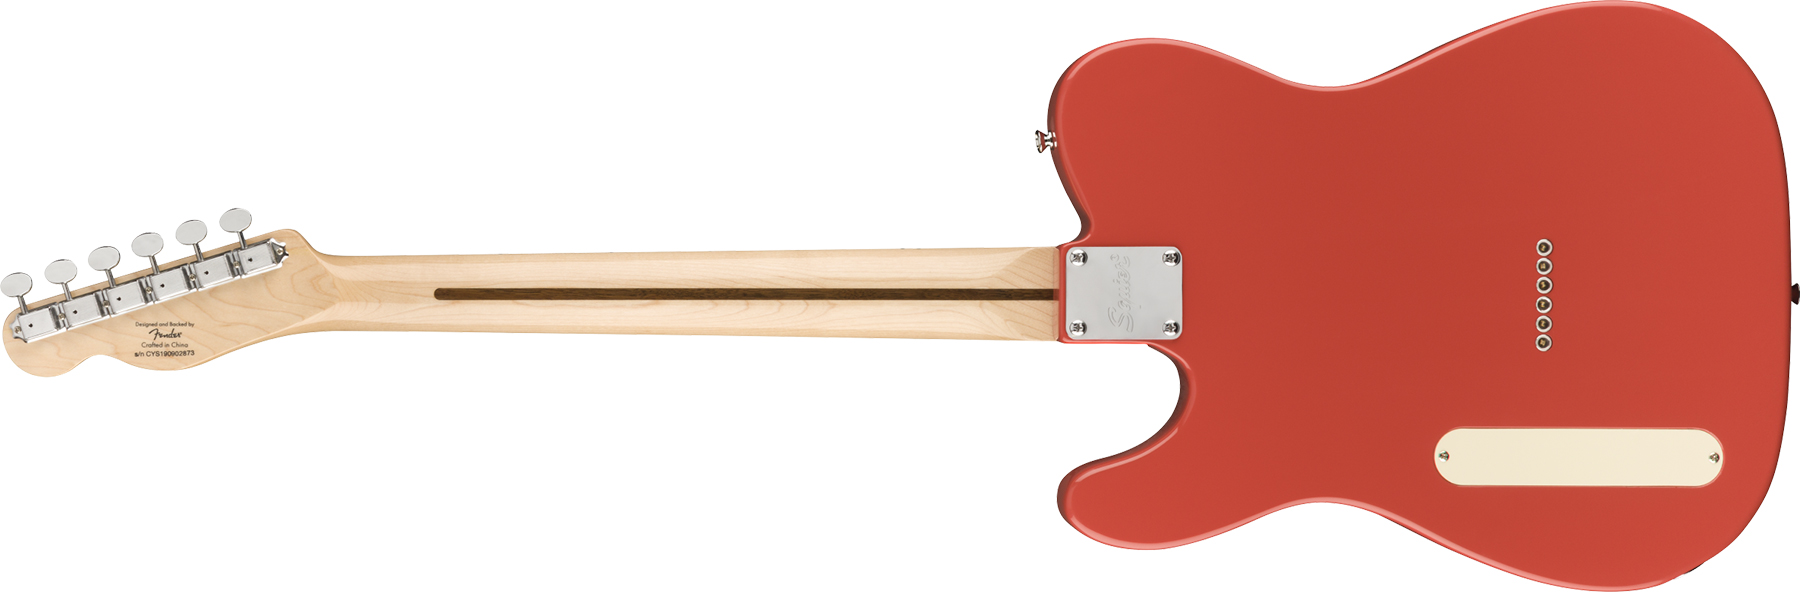 Squier Tele Thinline Cabronita Paranormal Ss Ht Mn - Fiesta Red - Semi-hollow electric guitar - Variation 1